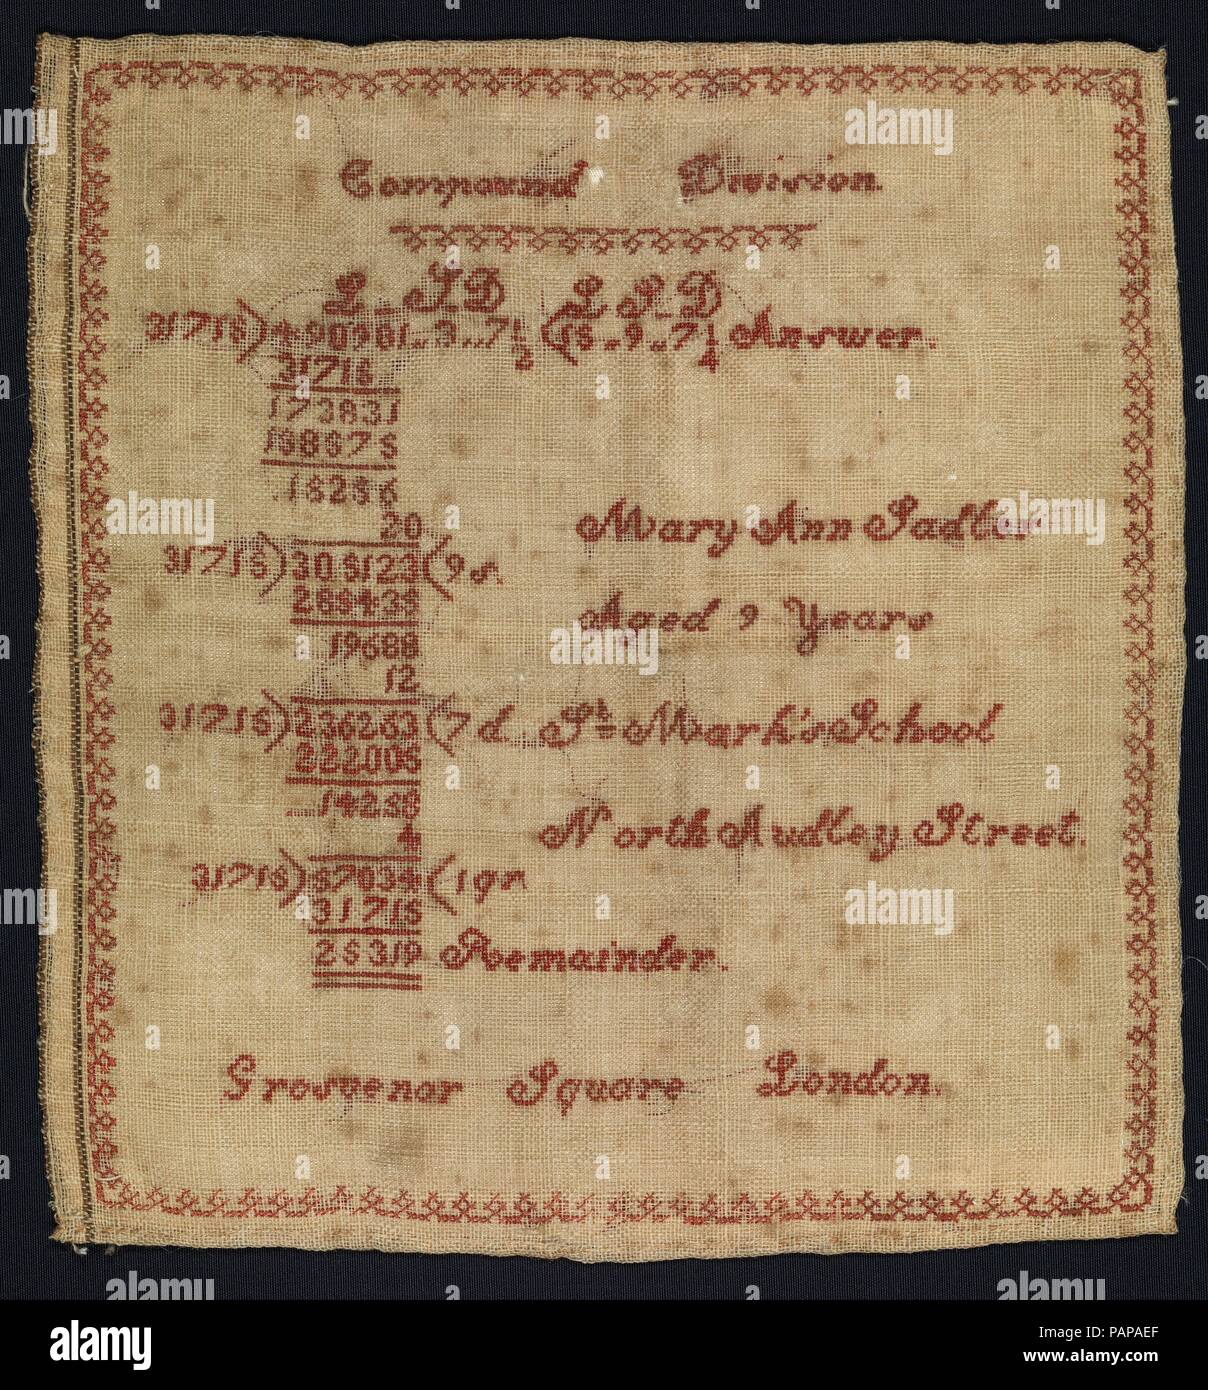 Sampler with compound division equation. Culture: British, London. Dimensions: H. 6 3/8 x W. 6 3/4 inches (16.2 x 17.1 cm). Maker: Mary Ann Sadler. Date: mid-19th century.  We may never know what inspired nine-year-old Mary Ann Sadler to convert her mathematics equation into embroidered form. The problem is worked on the basis of the British monetary system using British pounds, shillings, pence (pennies) and farthings. Mary Ann was a student at St. Mark's School, which was located next to St. Marks's church on North Audley Street off of Grosvenor Square, near Hyde Park. The school opened in 1 Stock Photo